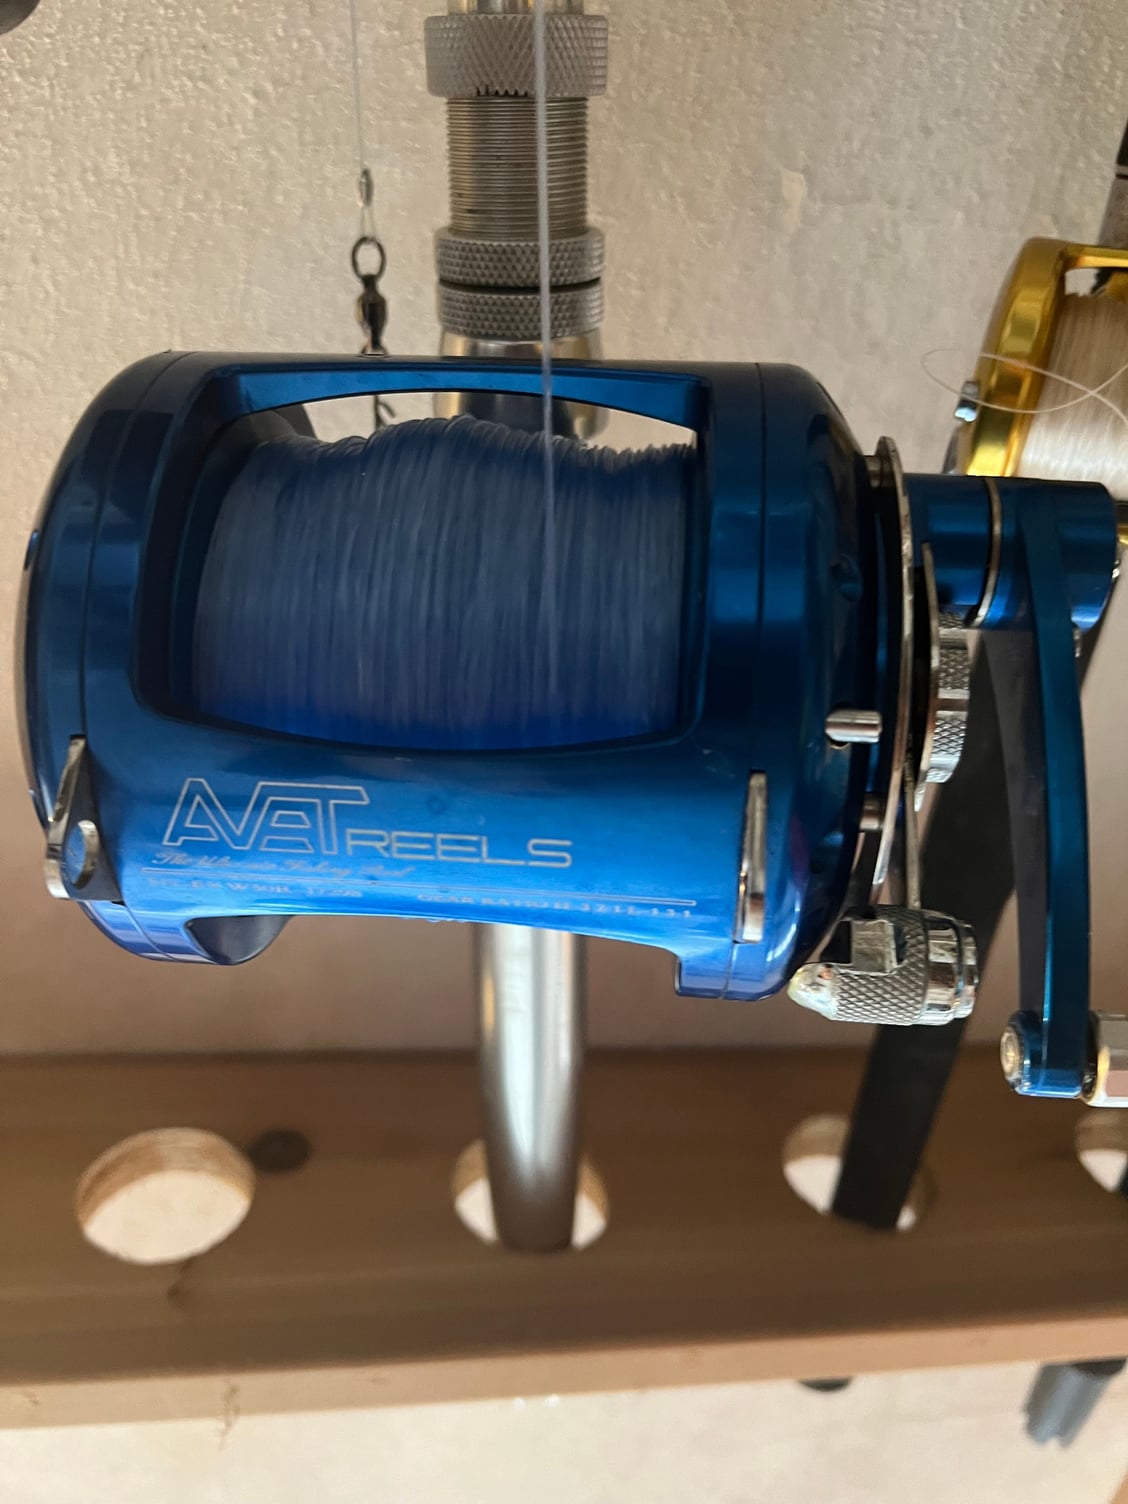 2x Avet 50W - Blue - The Hull Truth - Boating and Fishing Forum